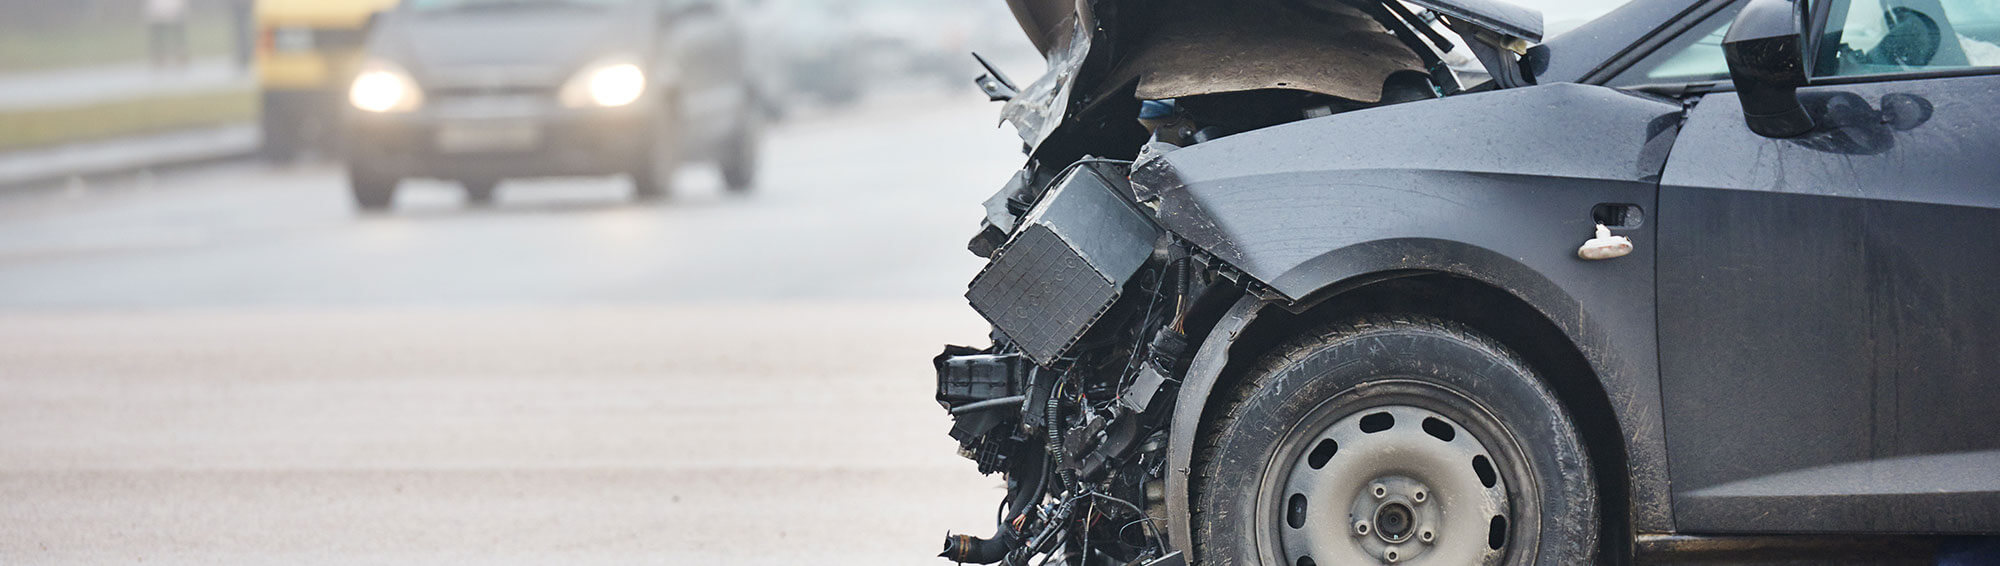 Why Do You Need to Contact Your Own Insurance Company After a Crash?